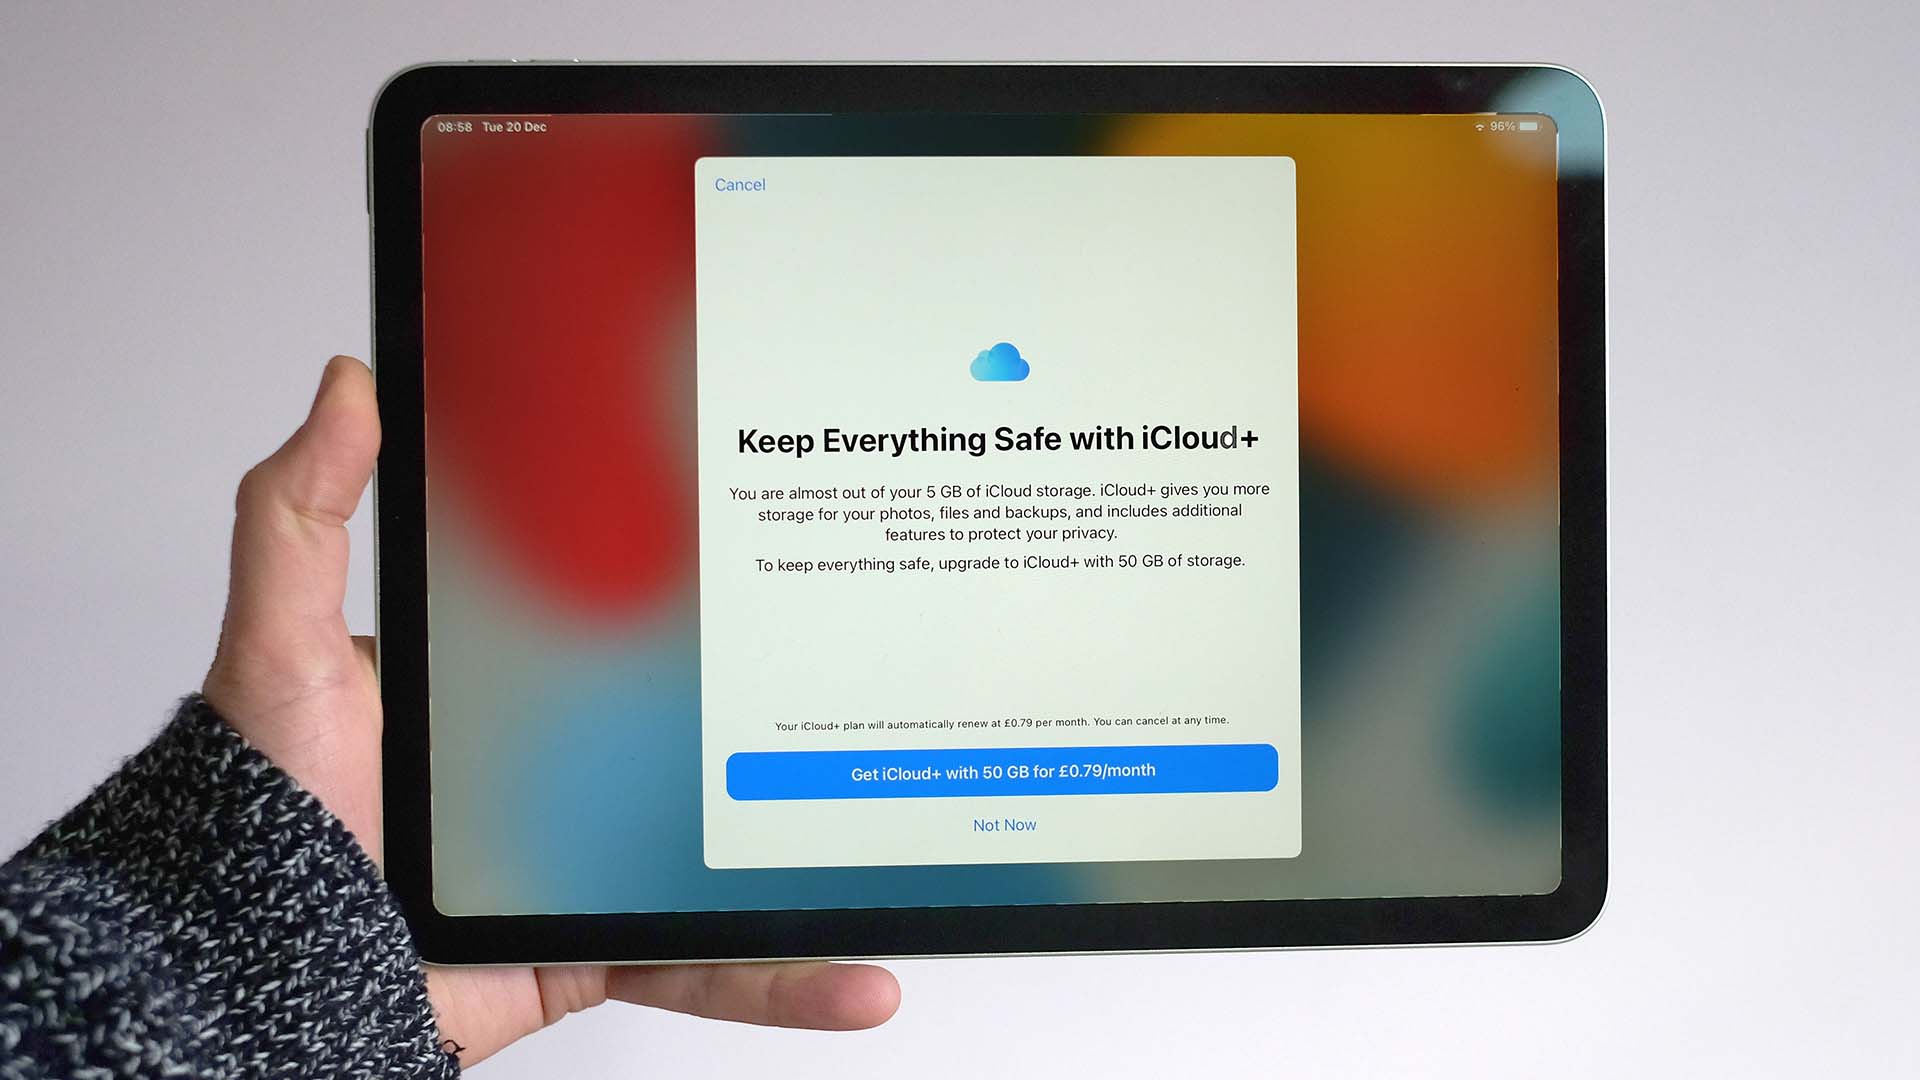 An iPad with the screen showing the iCloud+ screen